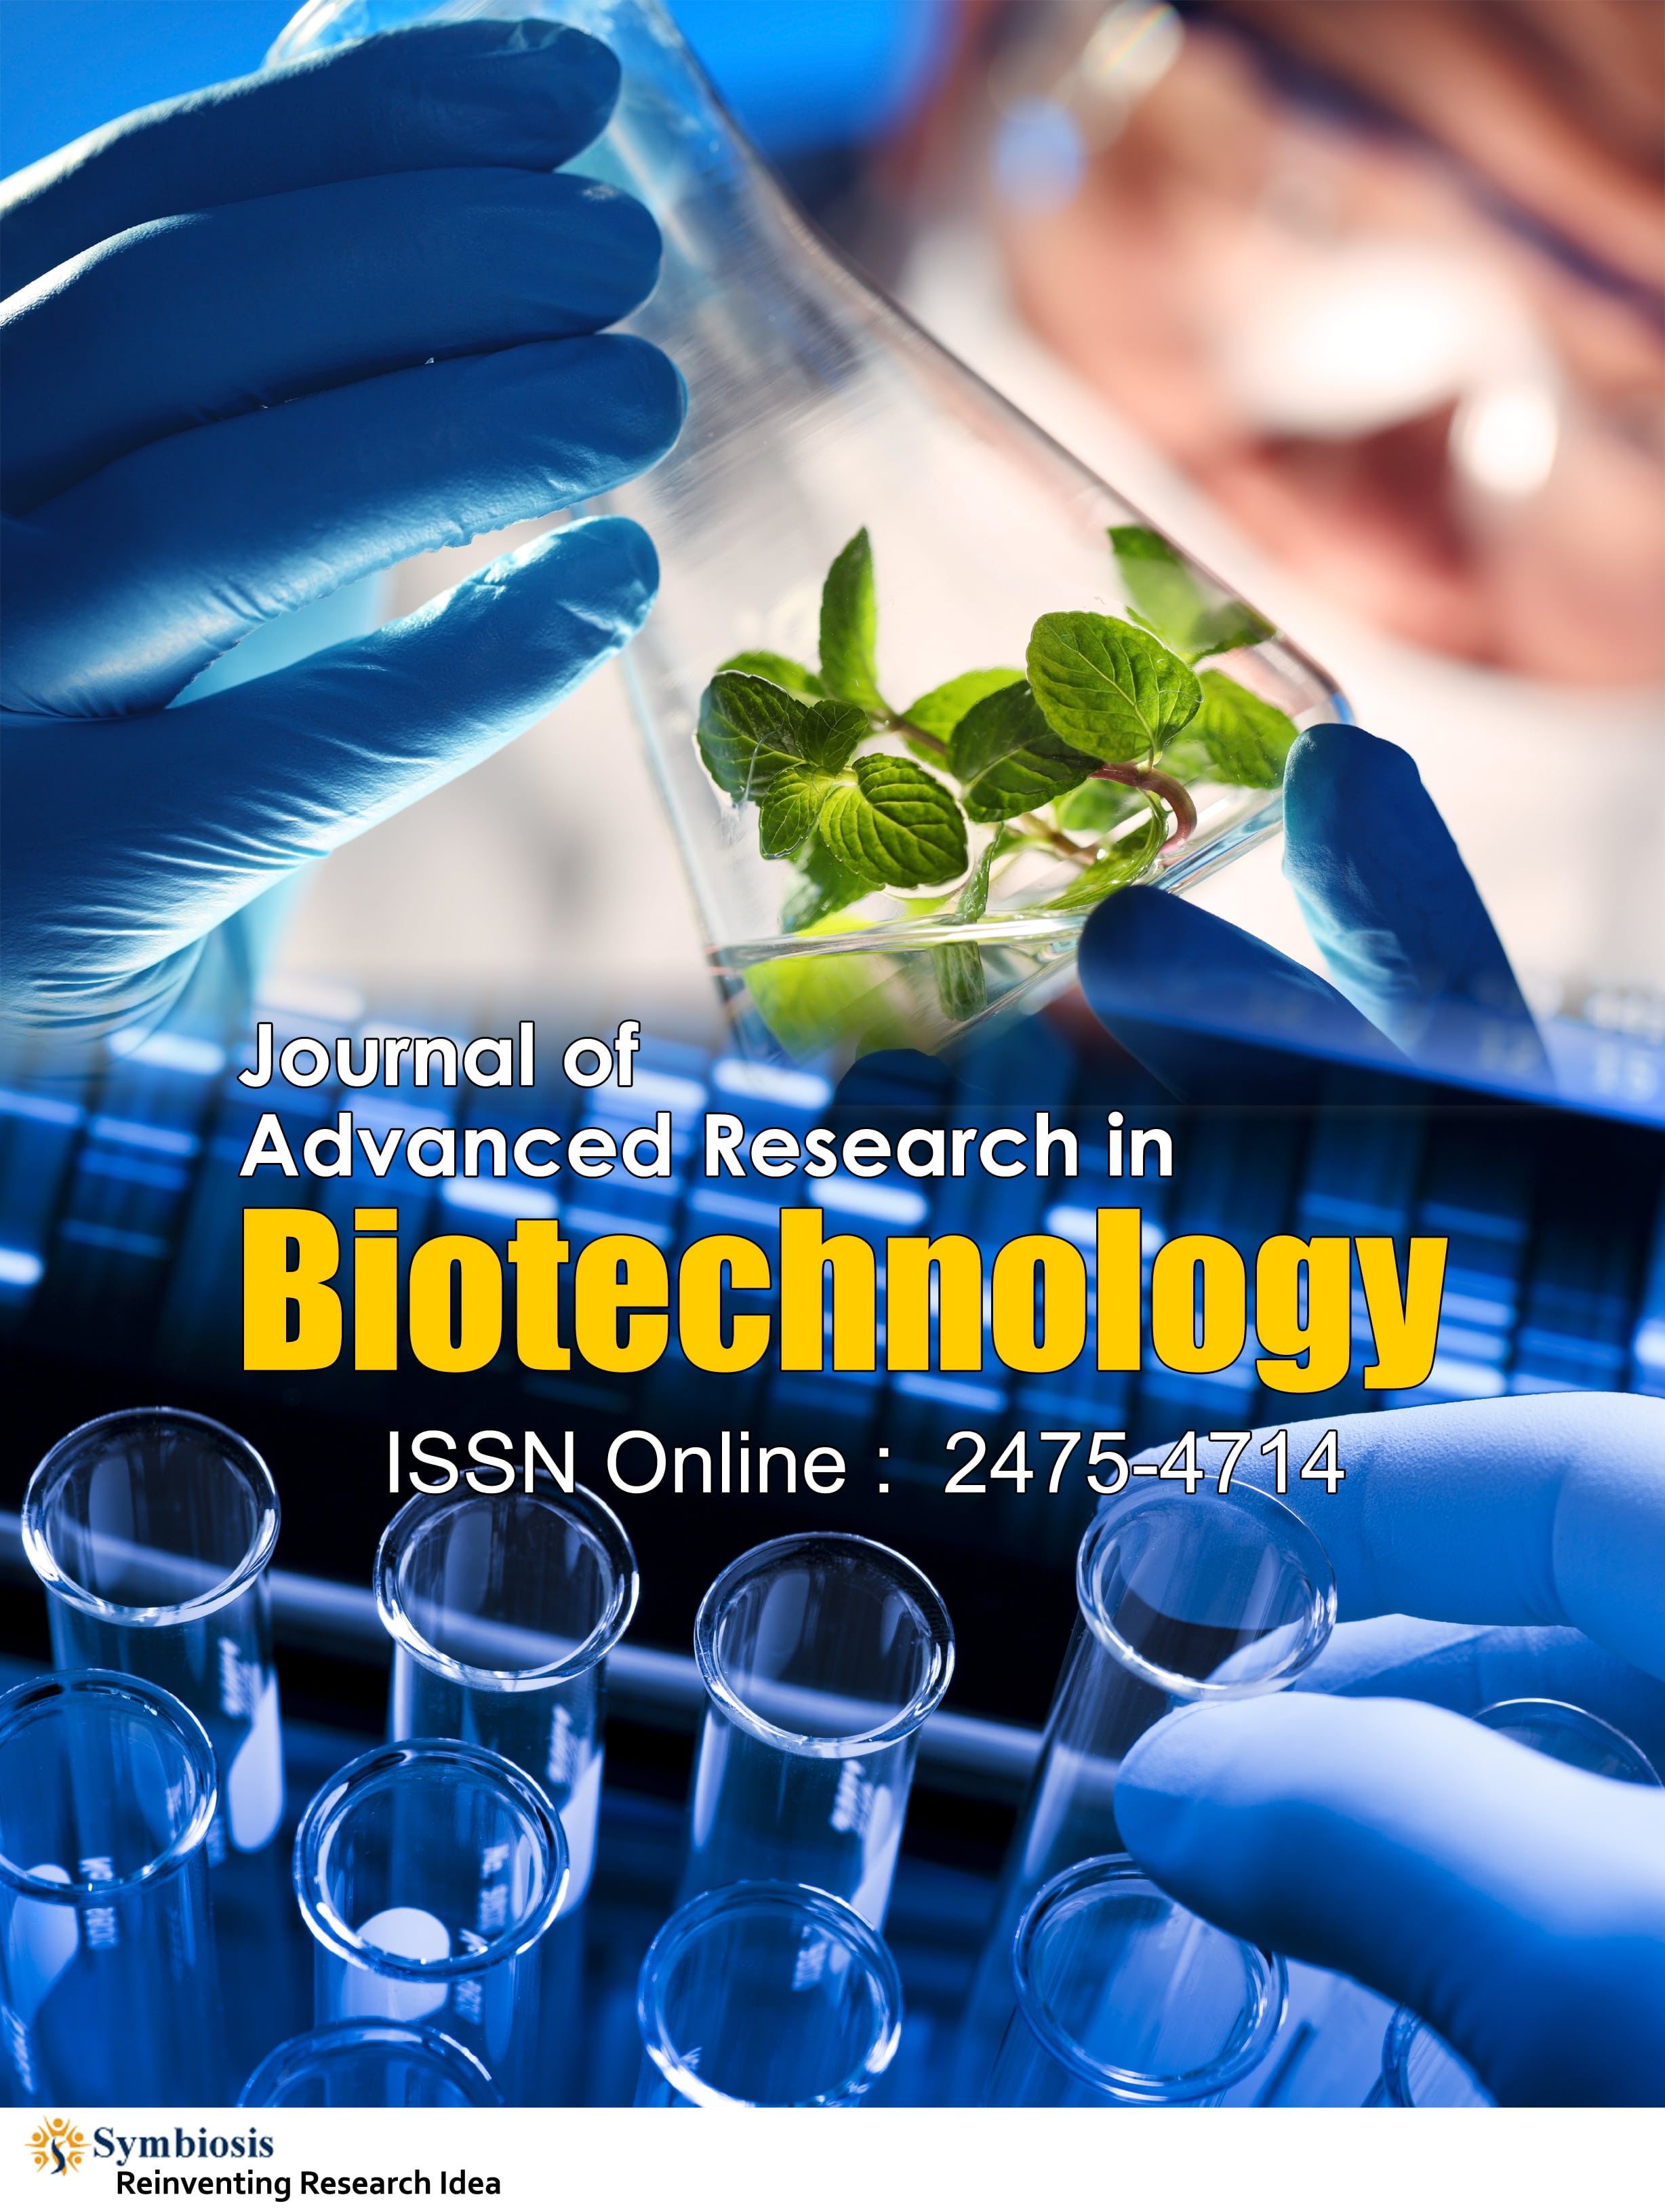 Journal of Advanced Research in Biotechnology